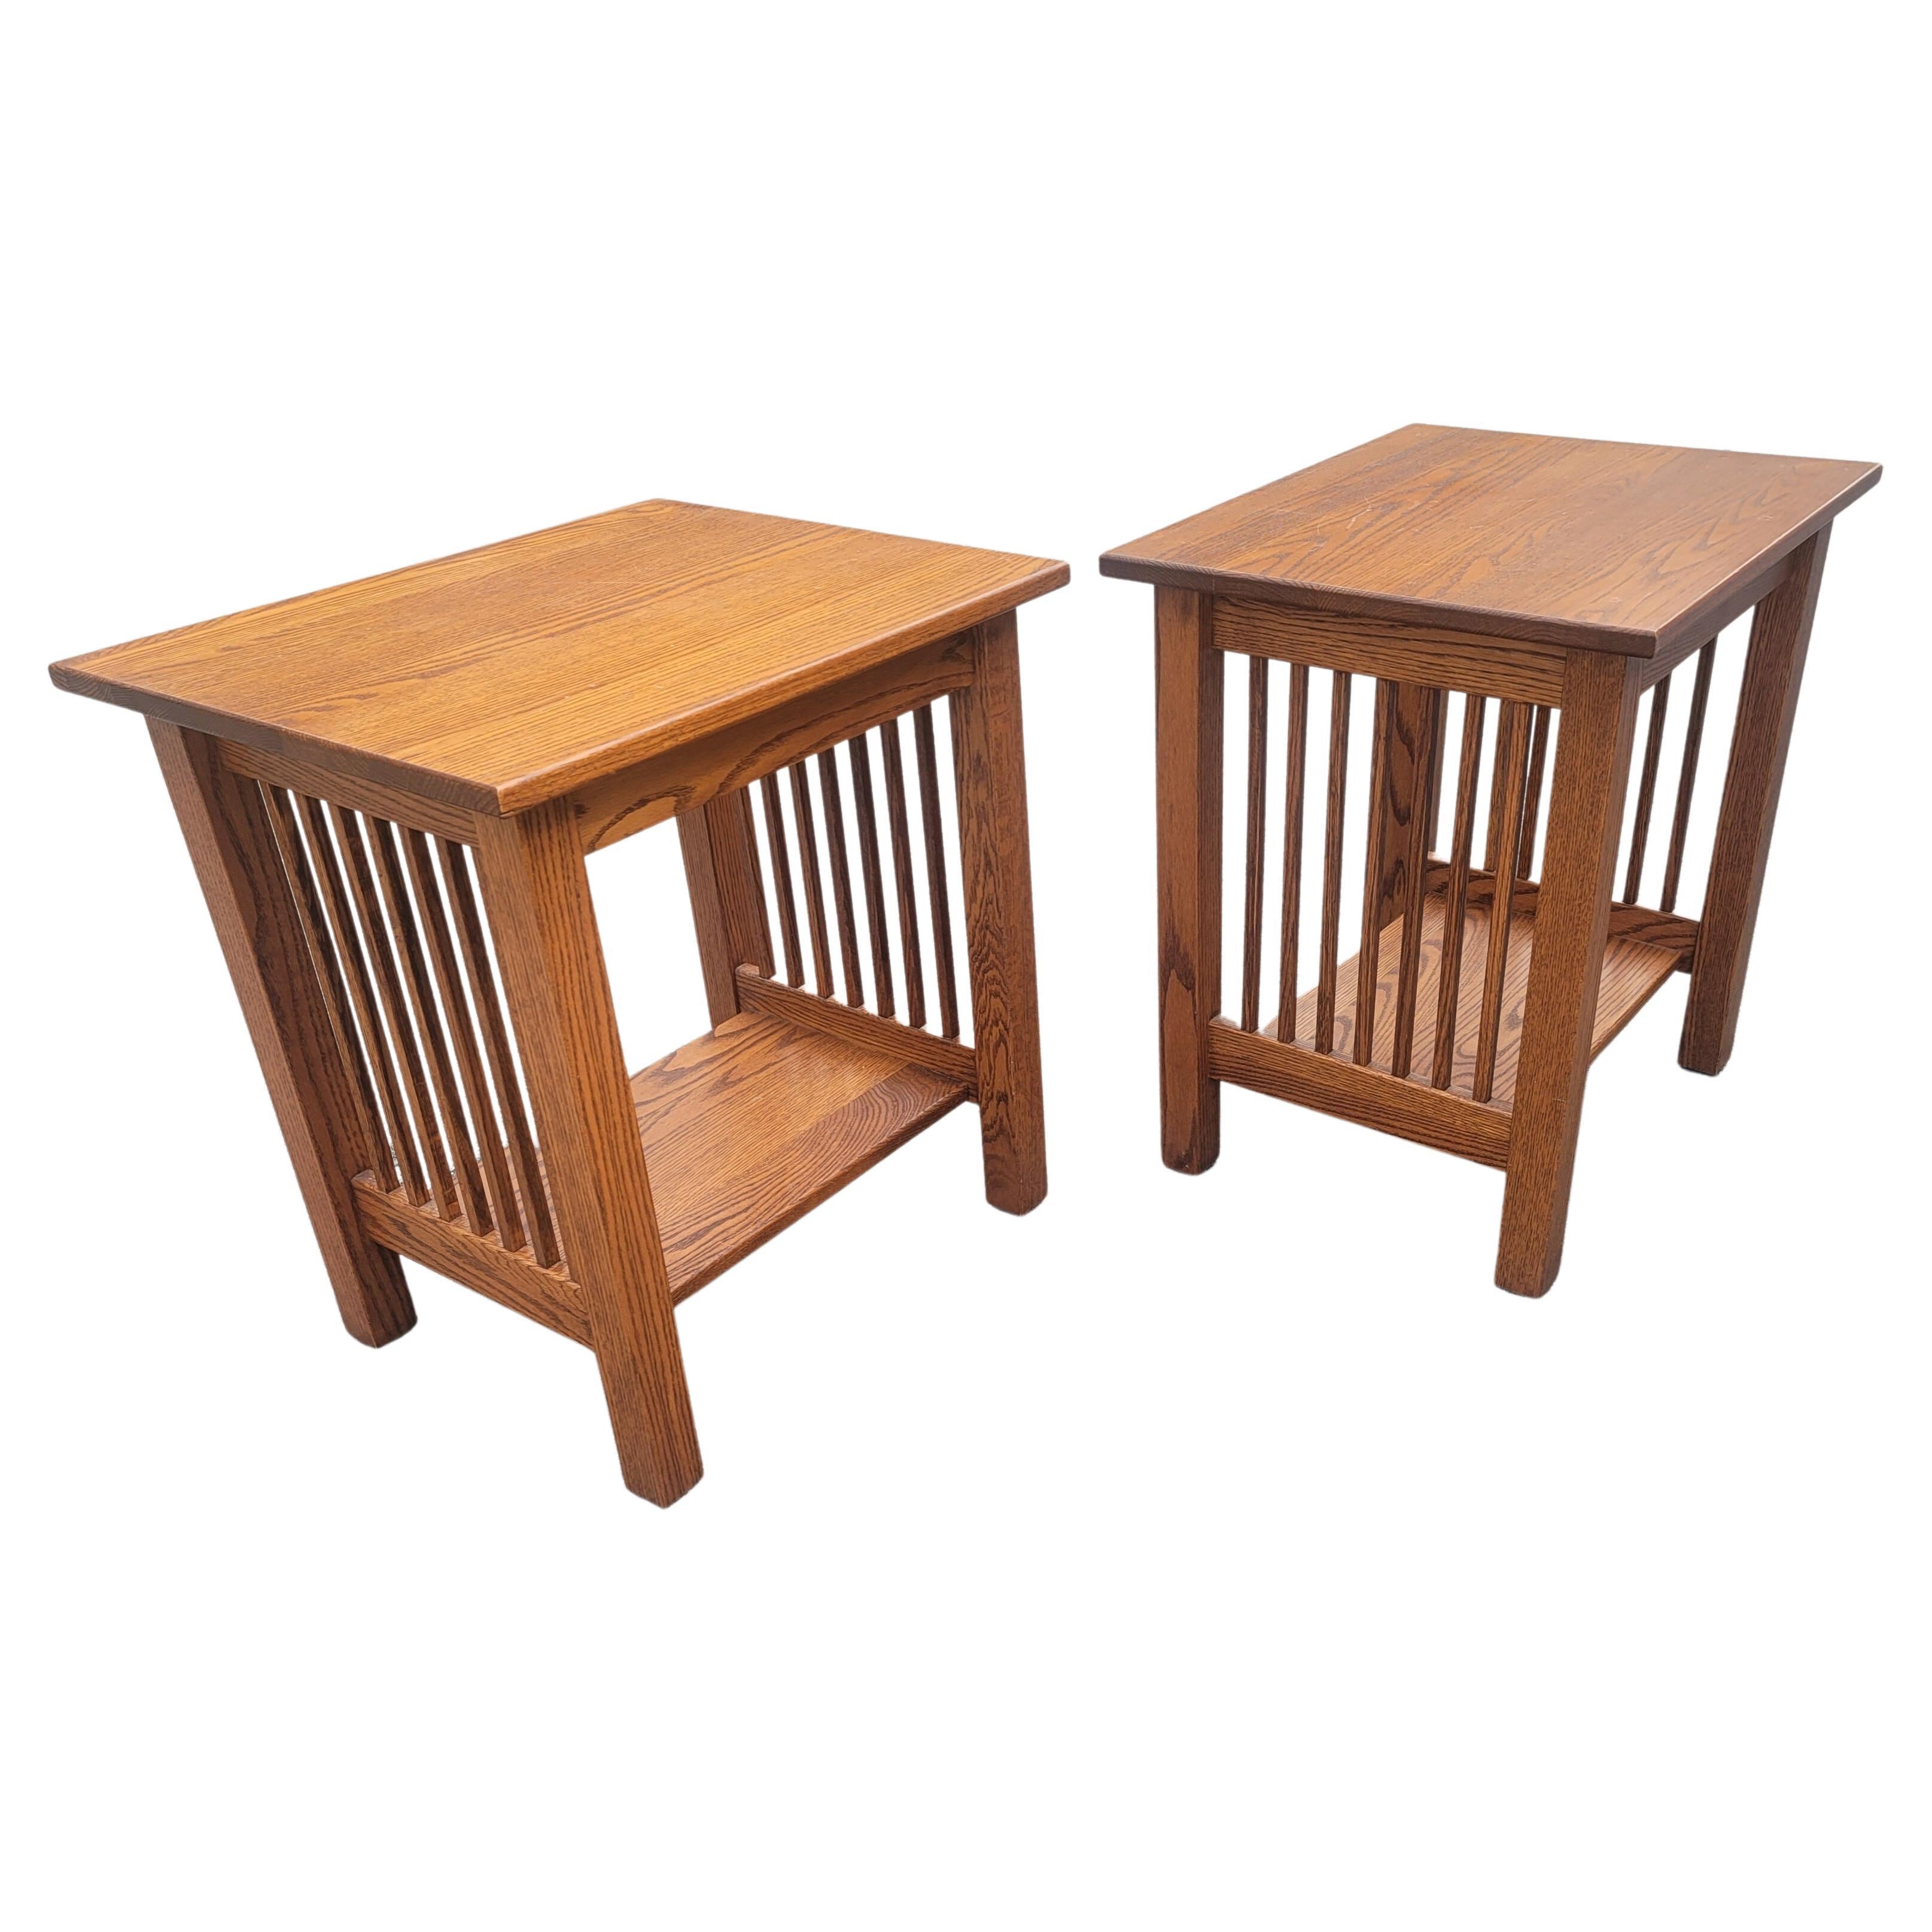 A pair of Amish handcrafted Arts & Crafts style Mission oak side tables by country view woodworking. 
Handcrafted in Ohio USA by the finest Amish artisans. Rock solid side tables in excellent vintage condition. 
Measures 22